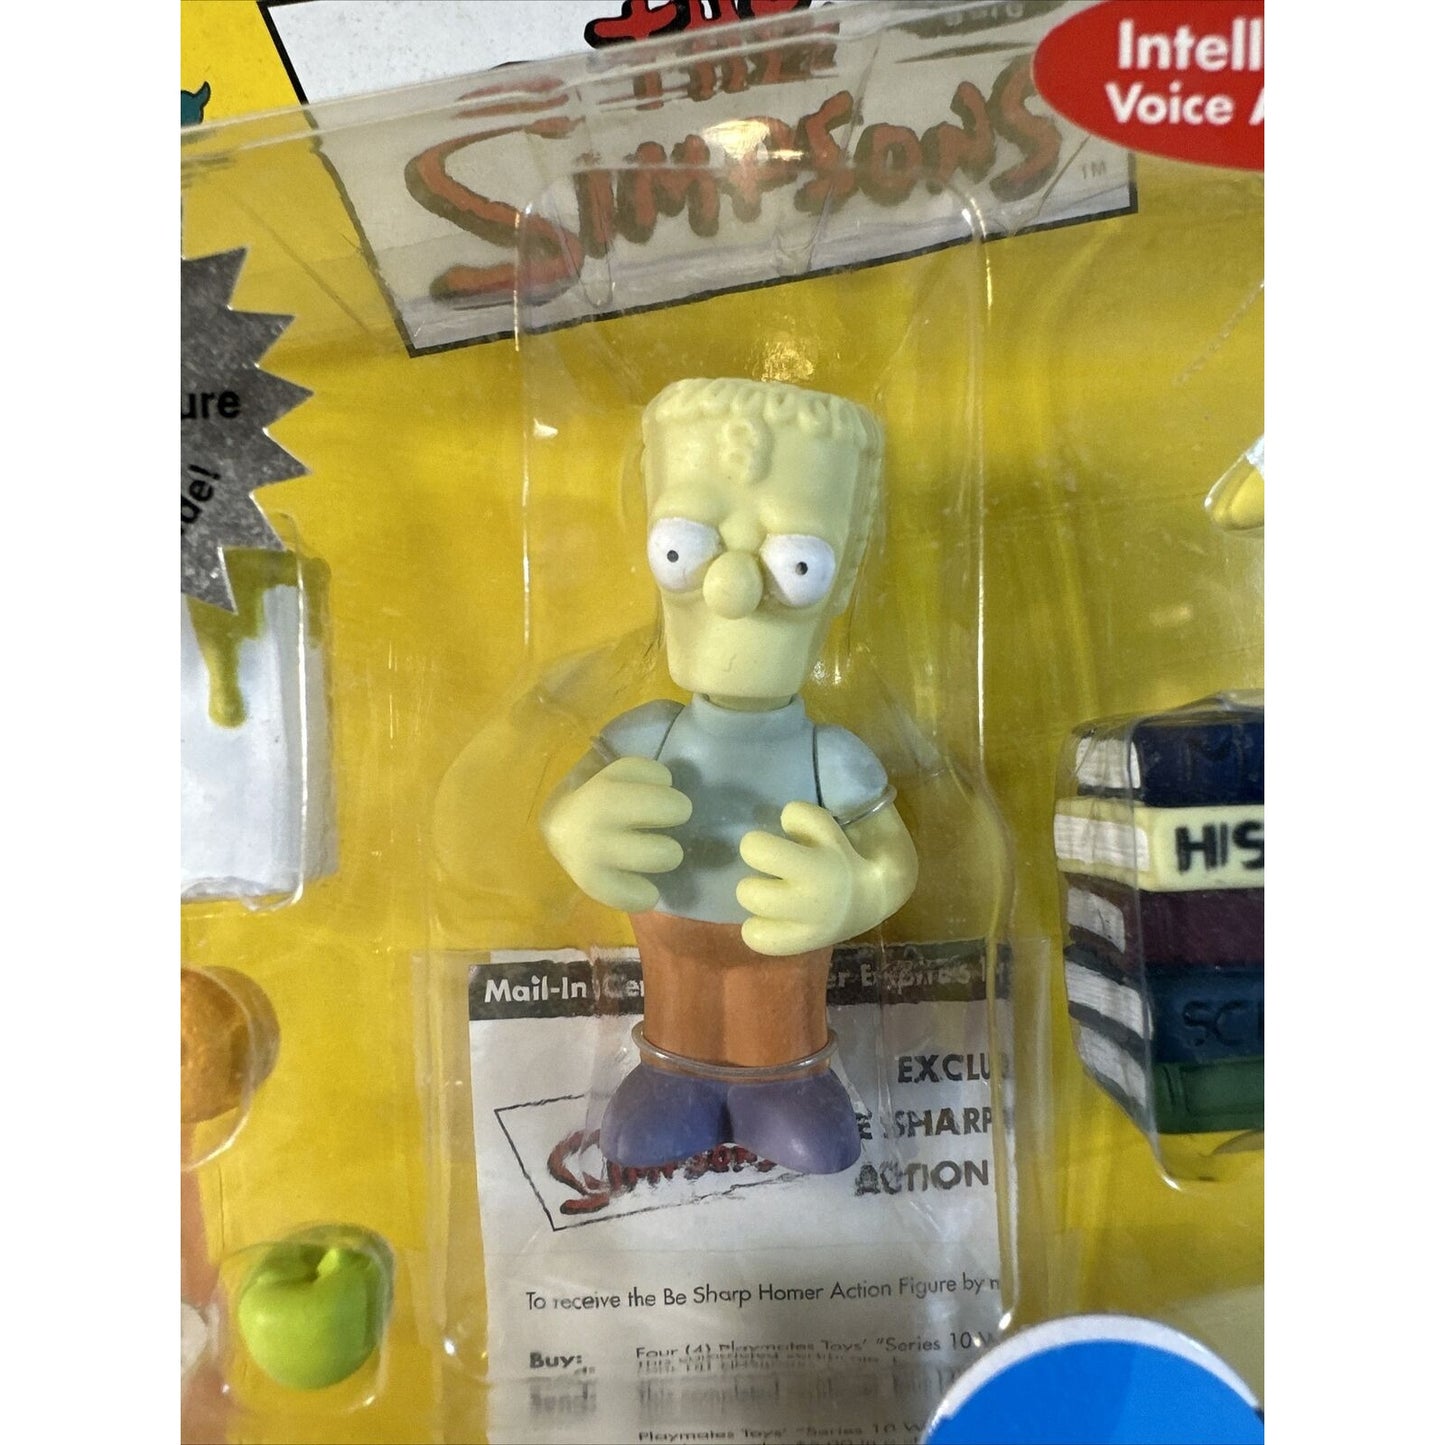 The Simpsons Wendell Series 10 World of Springfield Action Figure Playmates